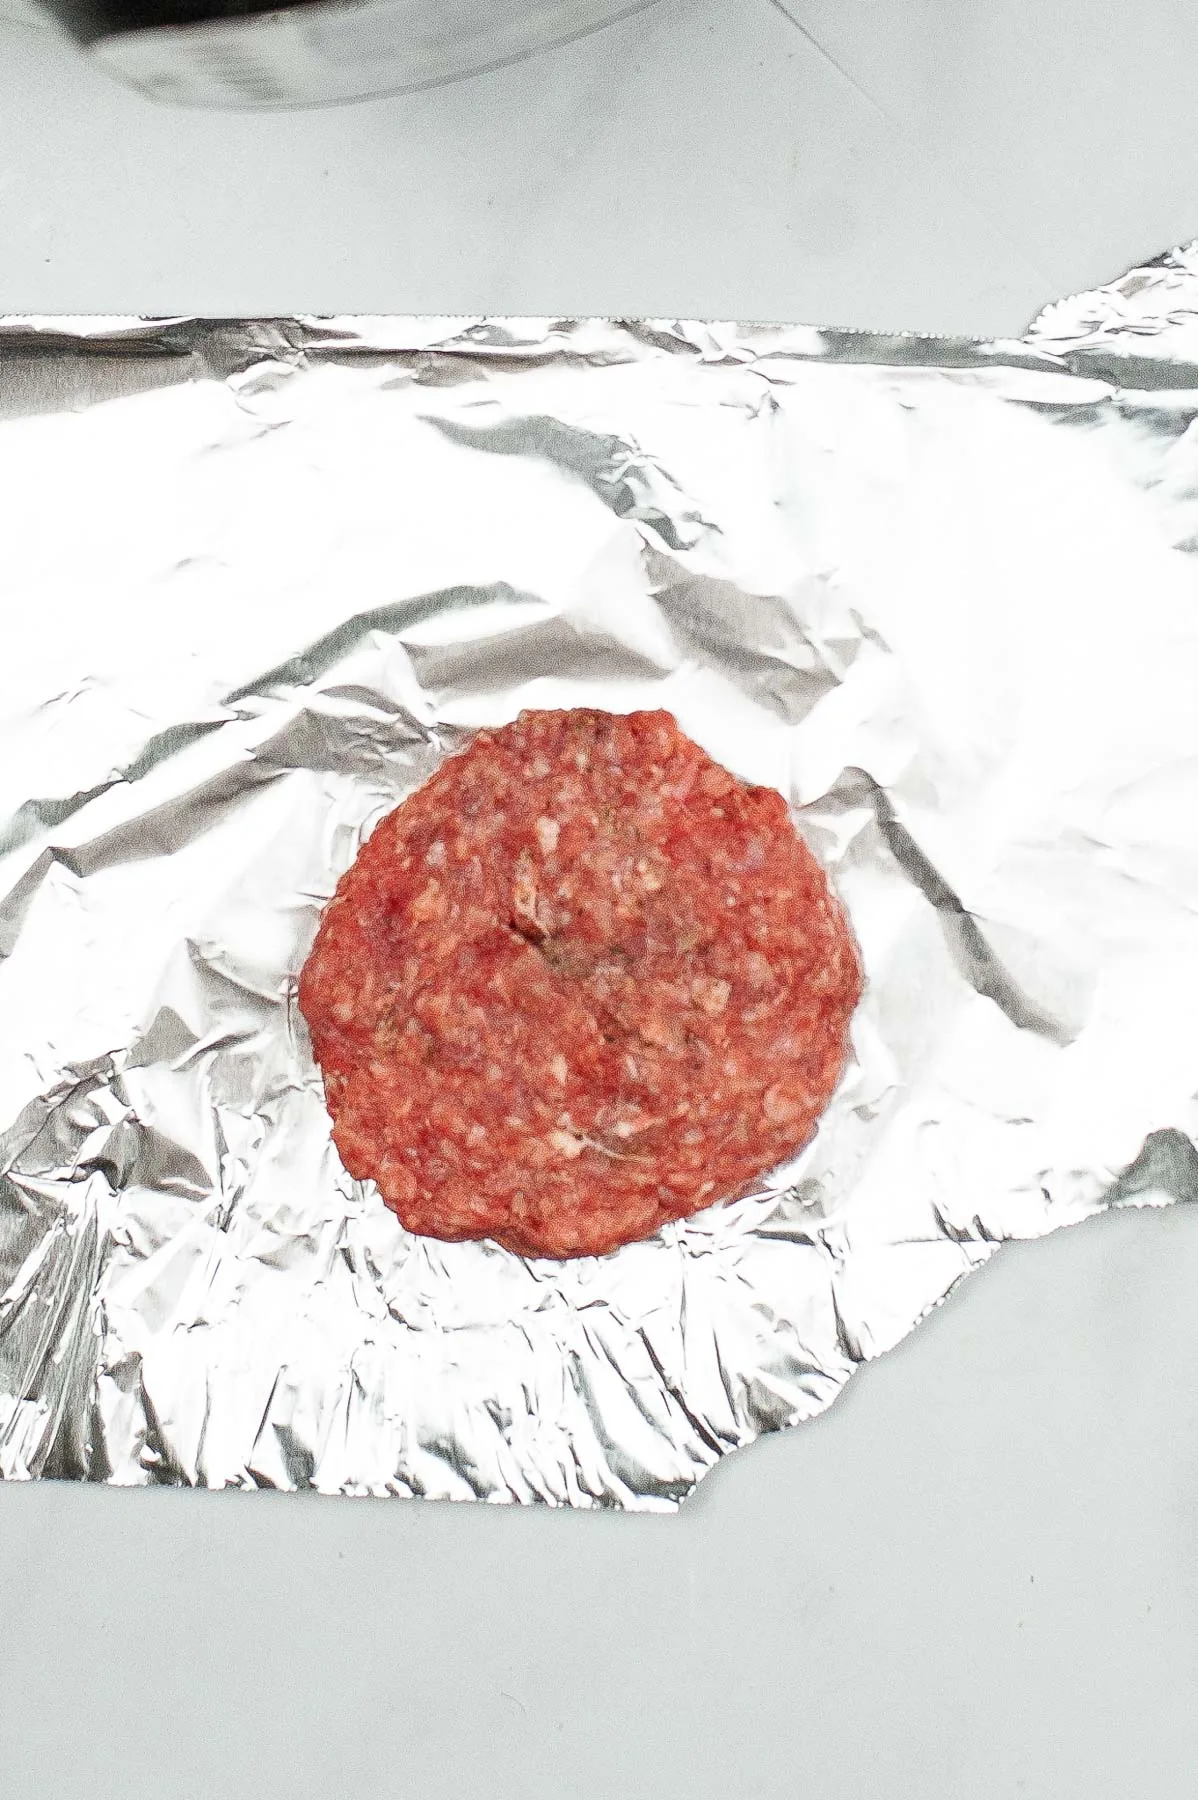 Seasoned ground beef patty on top of foil.